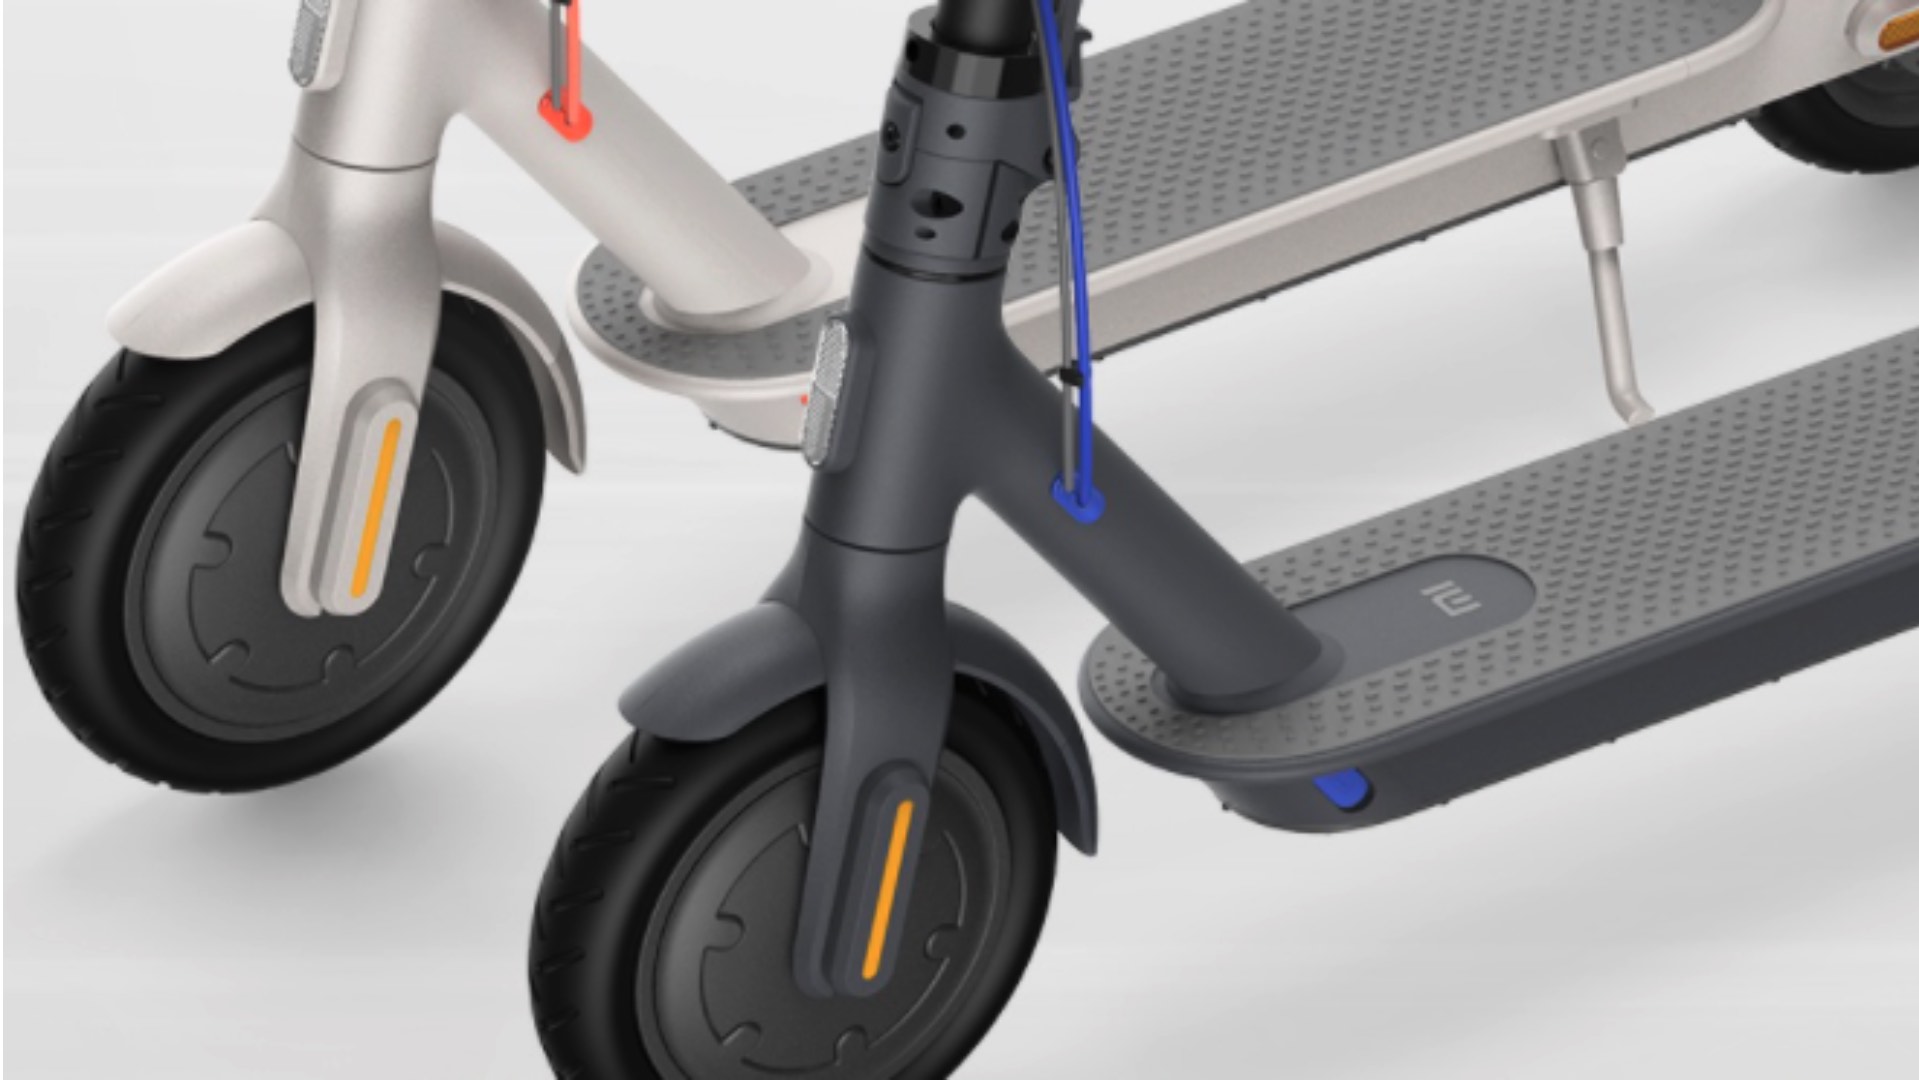 Xiaomi launched Electric Scooter with best features, know everything about Scooters